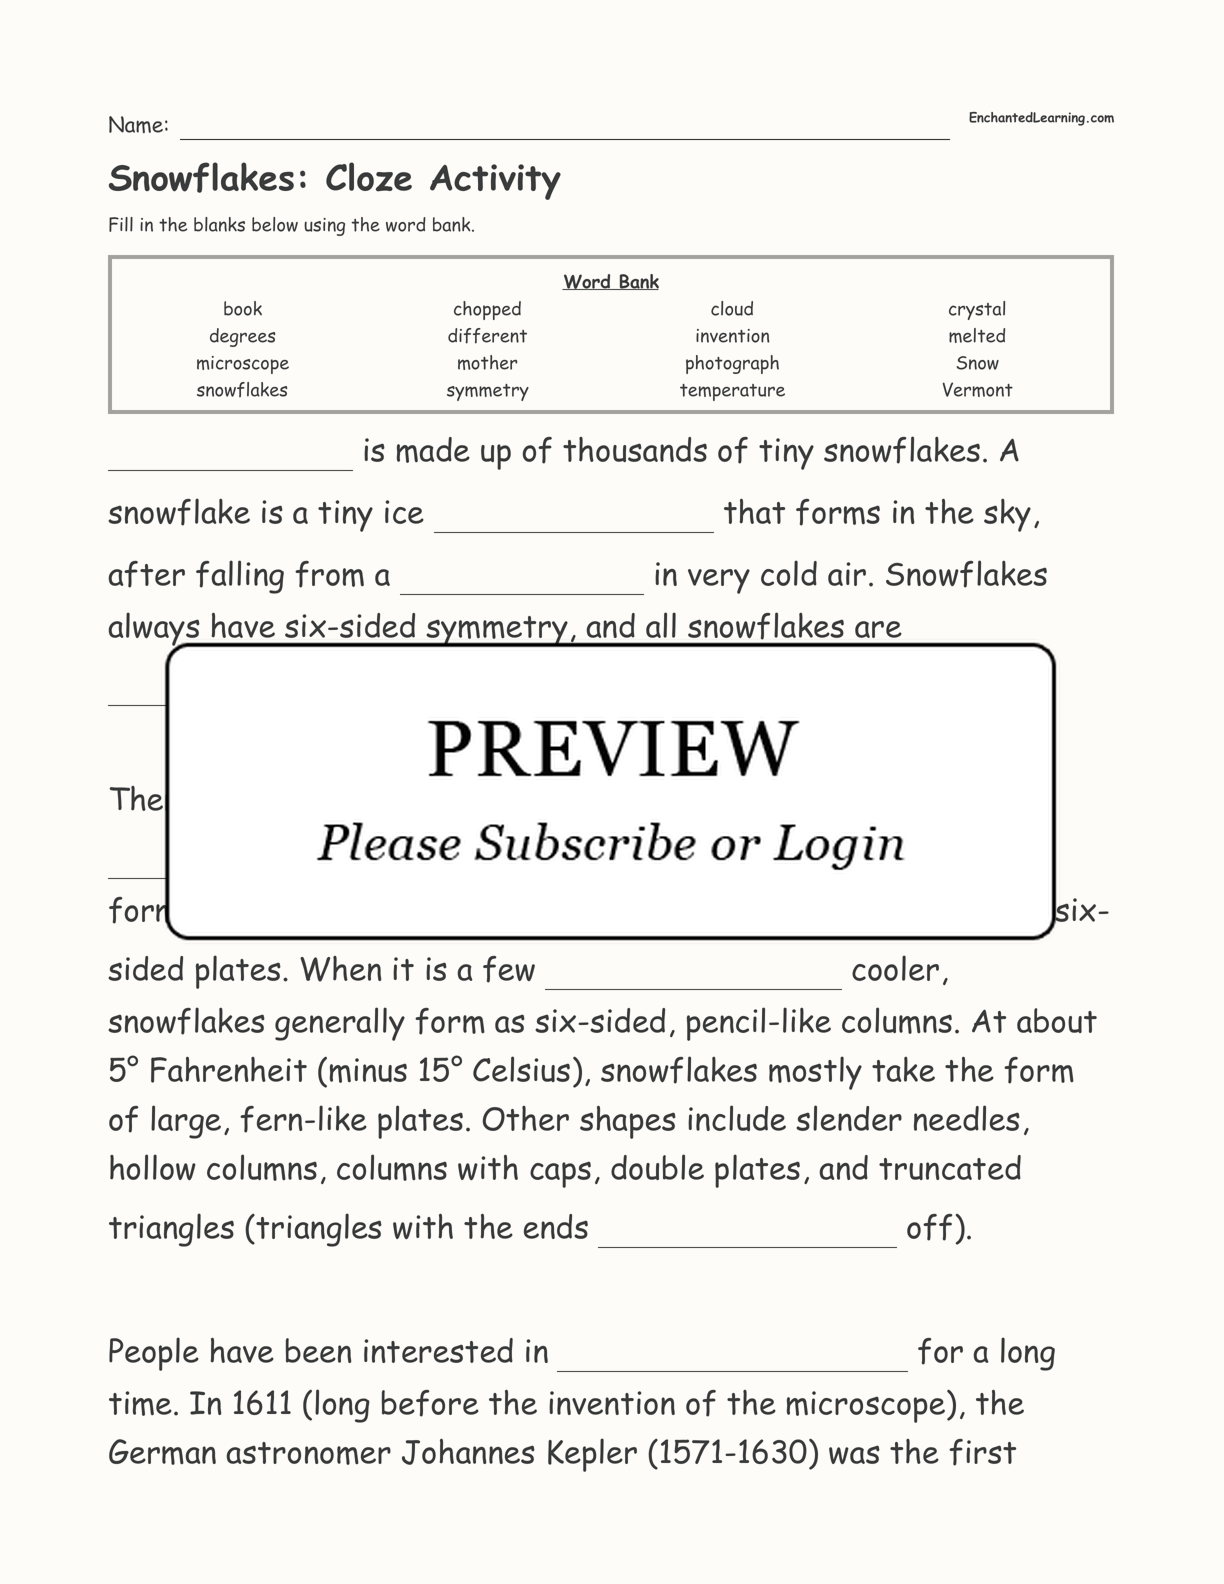 Snowflakes: Cloze Activity interactive worksheet page 1